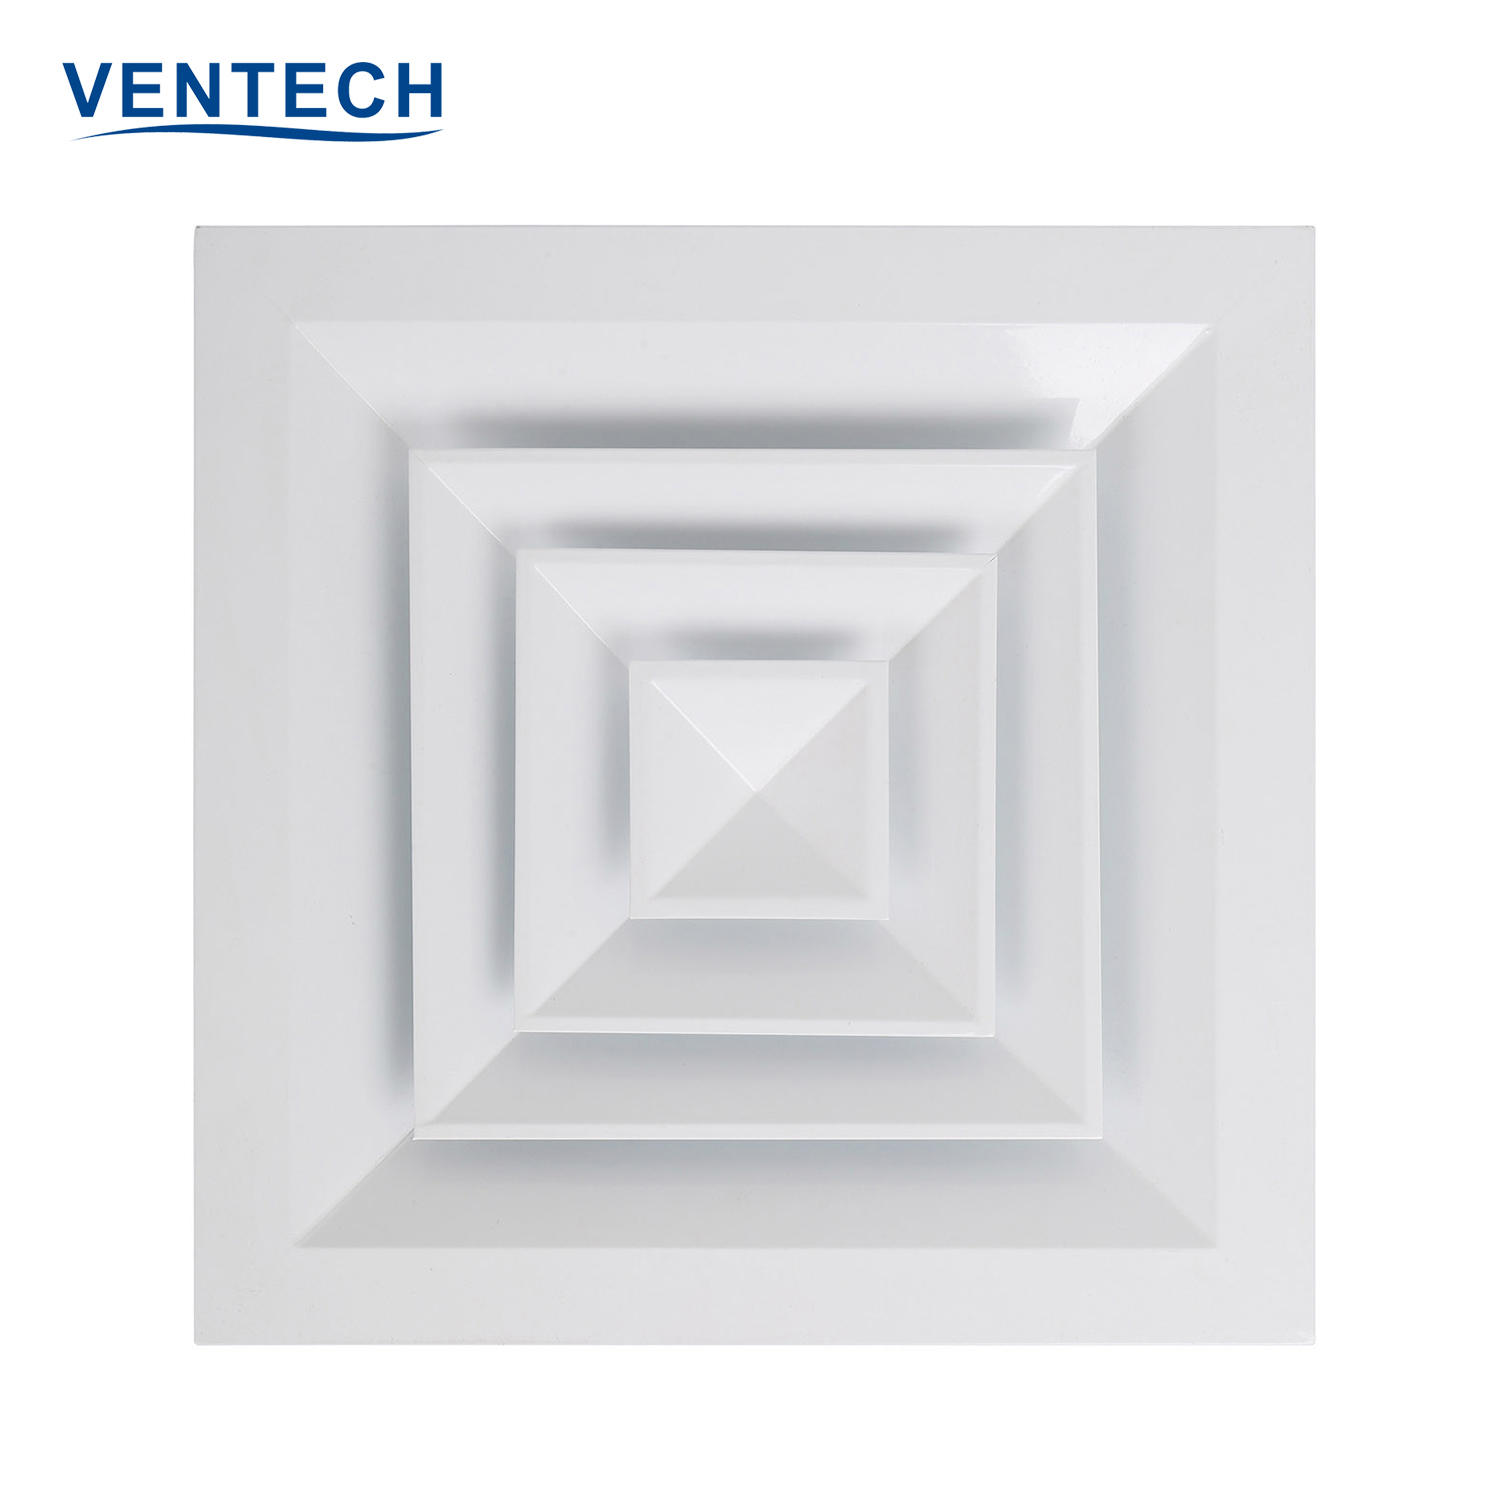 Ventech Air Duct Supply Air Square Ceiling Diffuser Conditioning